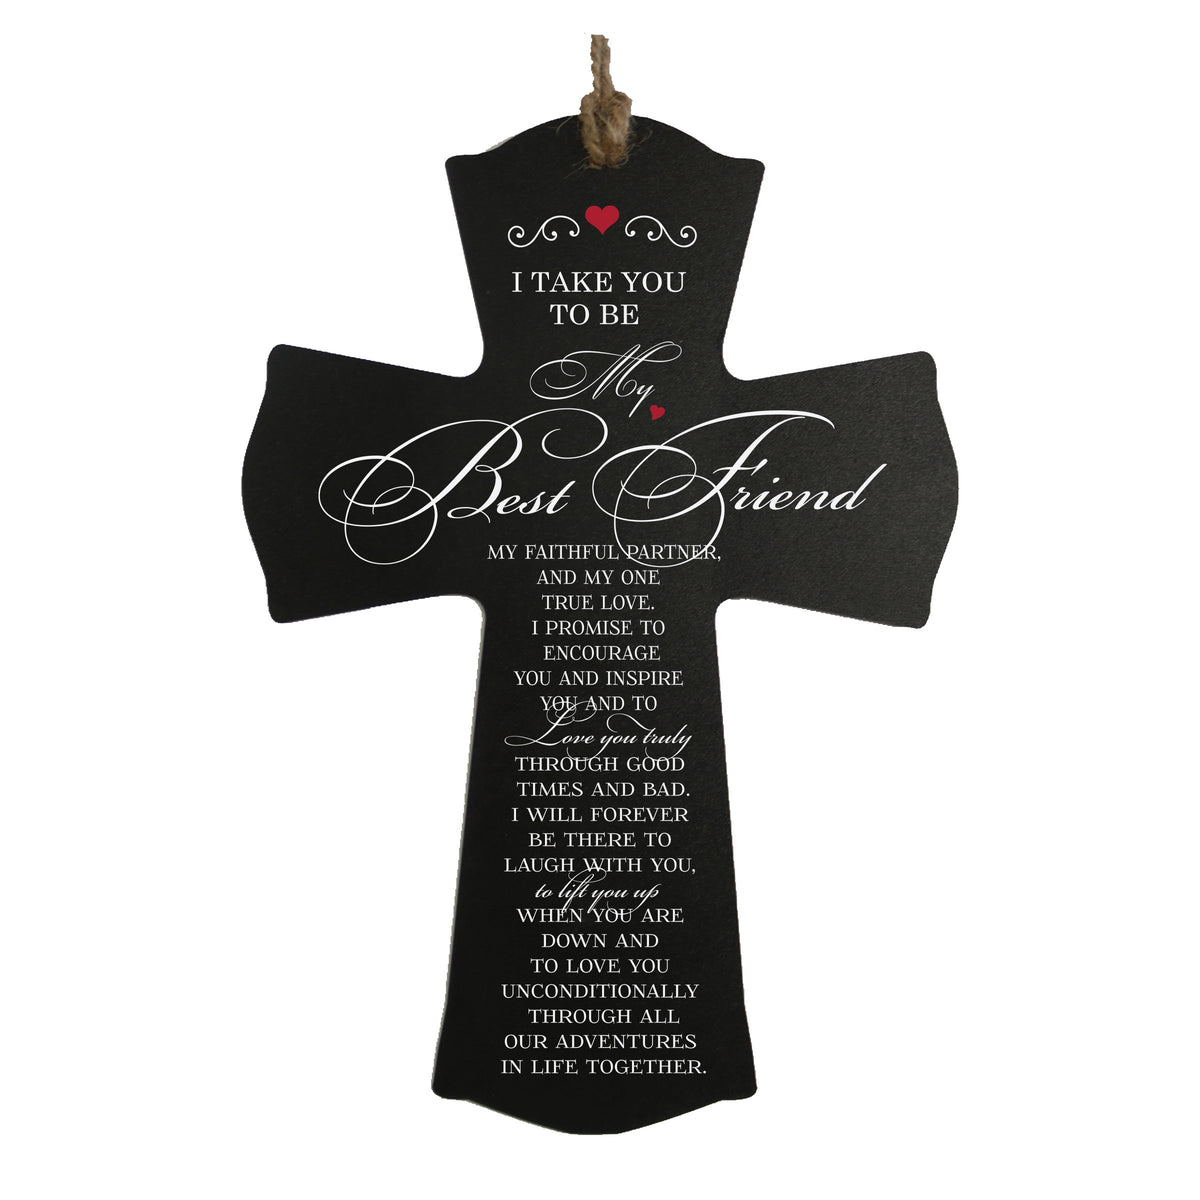 LifeSong Milestones Wedding Anniversary Gift for Husband Wife - New Couple Home Wall Cross For Wedding Day Celebration - 8.5” x 11”